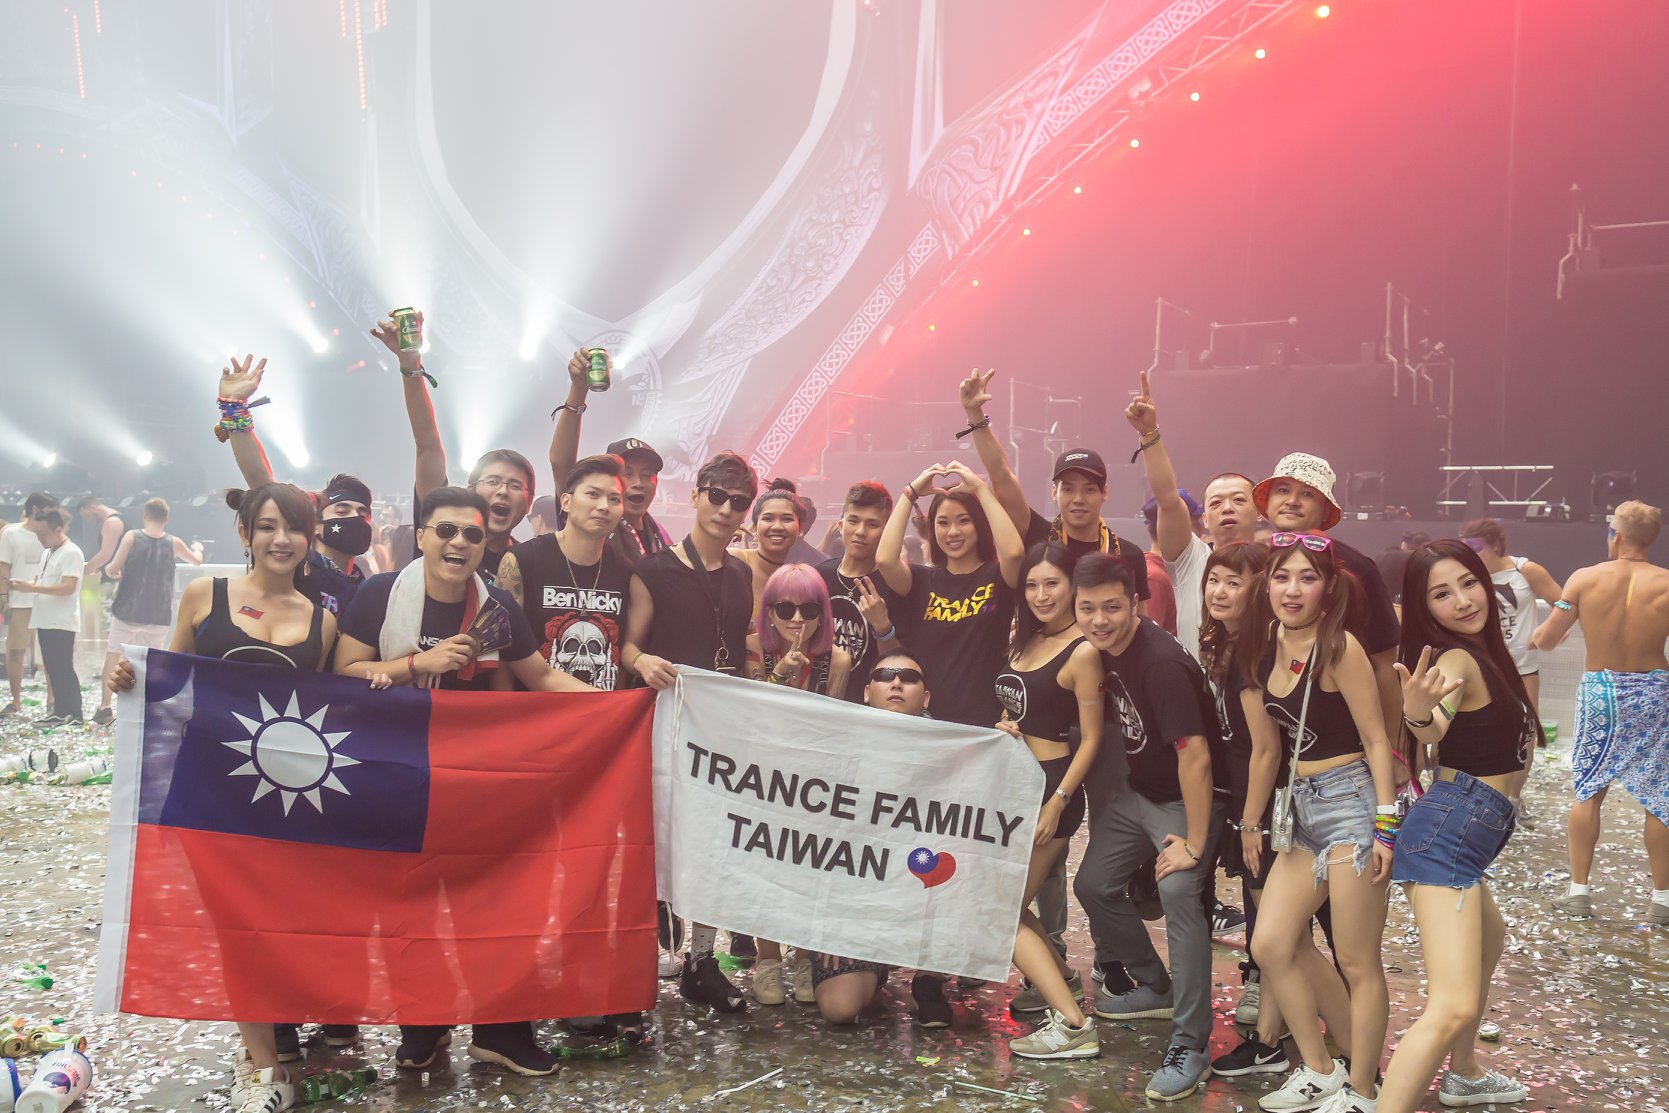 Guide to Transmission Bangkok | The Nitty Gritty Guide To Festivals